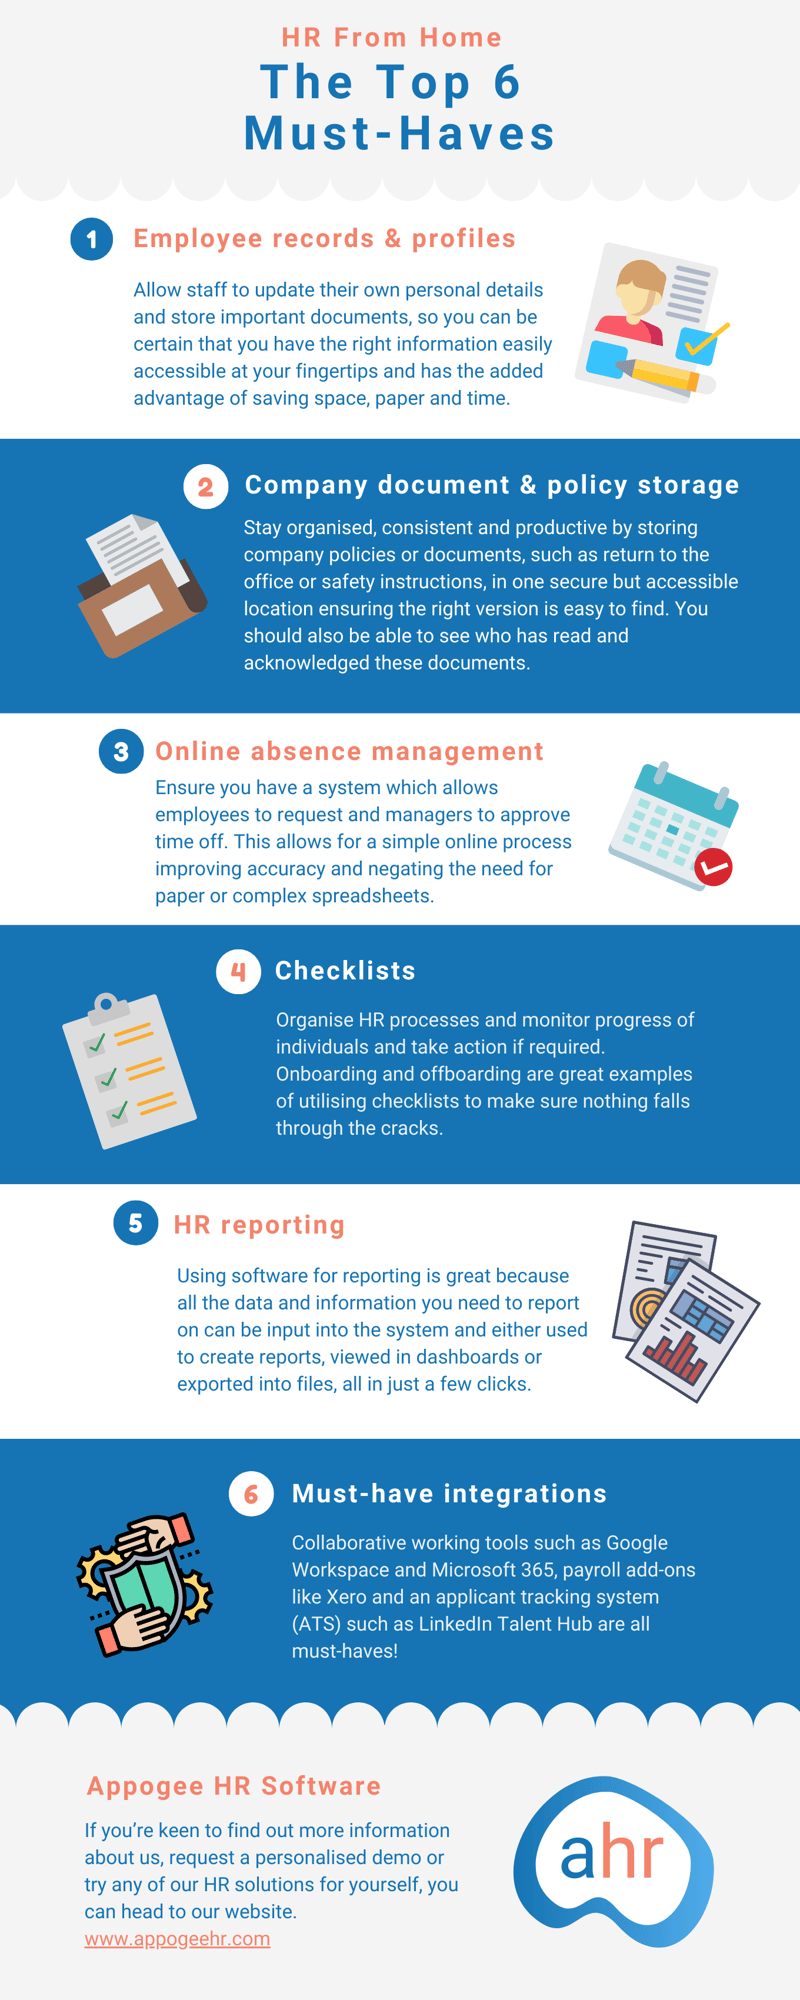 New brand - HR From Home Top 6 Must-Haves Infographic (1360 x 3400 px) (1)